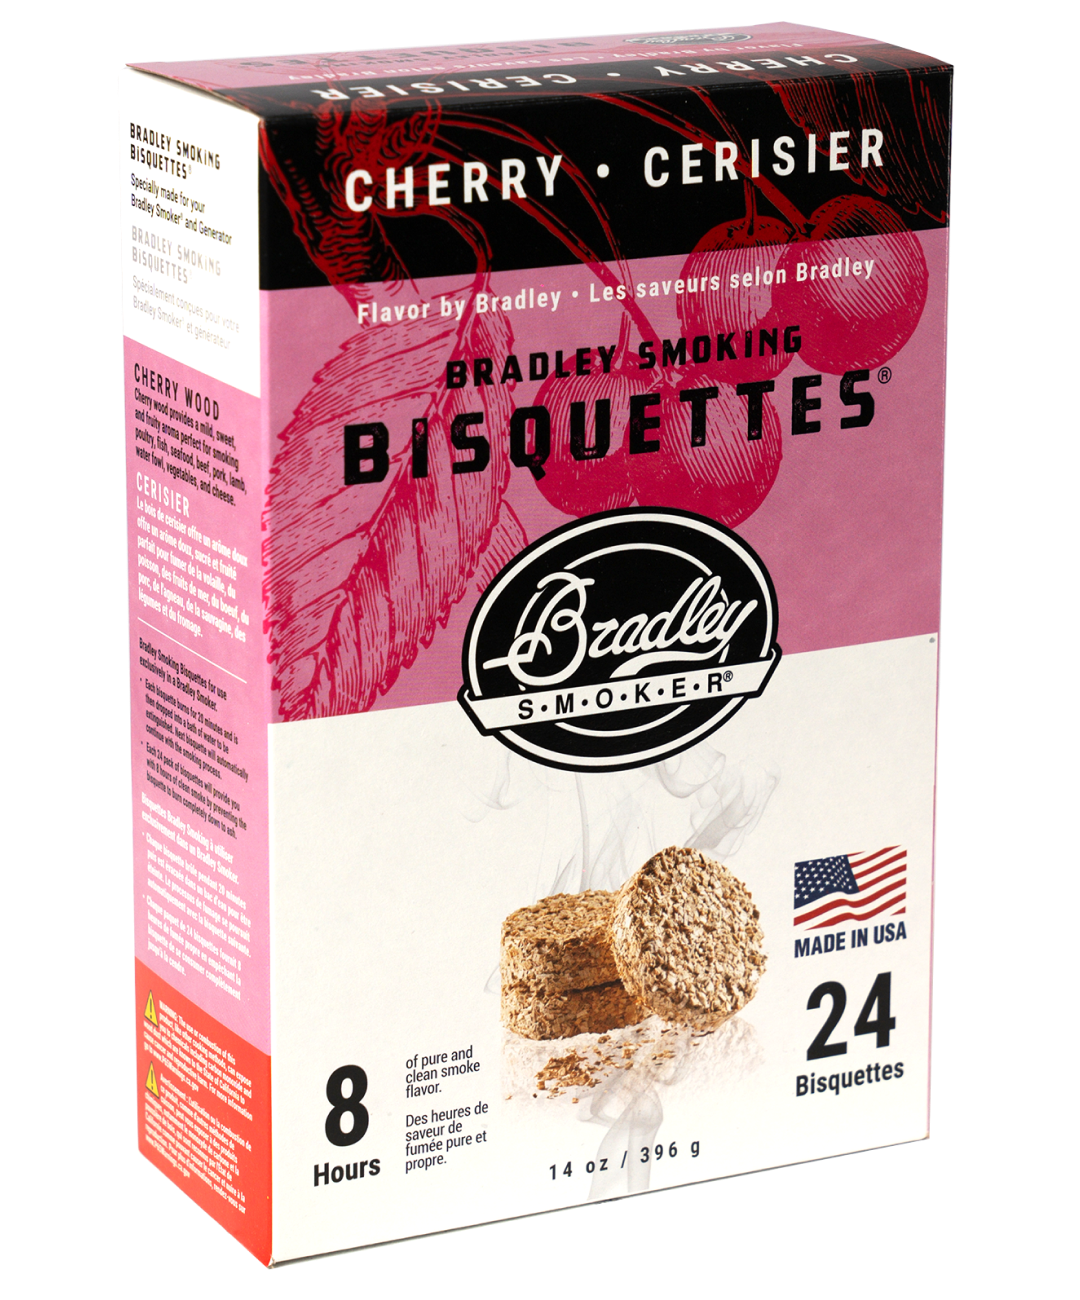 Cherry Wood Bisquettes